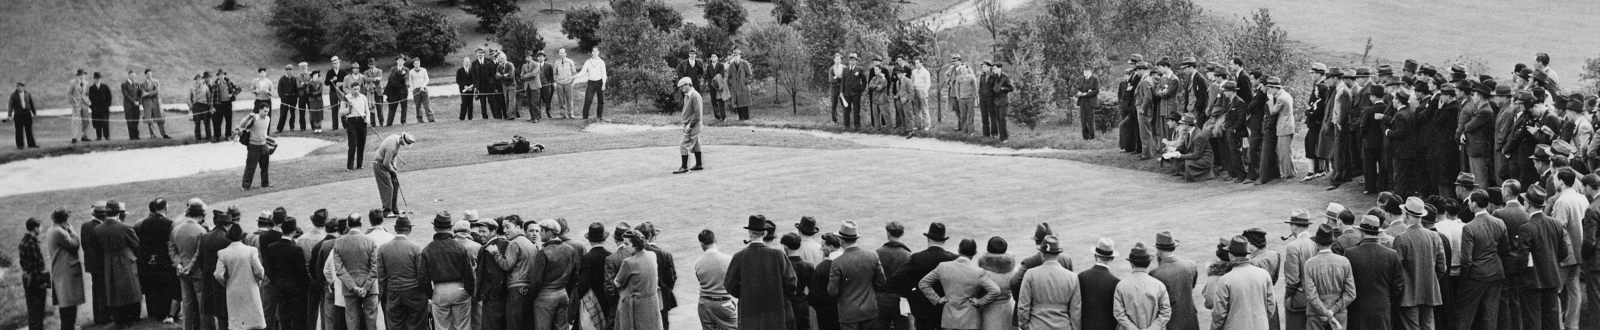 Fans circling a green during a Met Open in the 1930s.